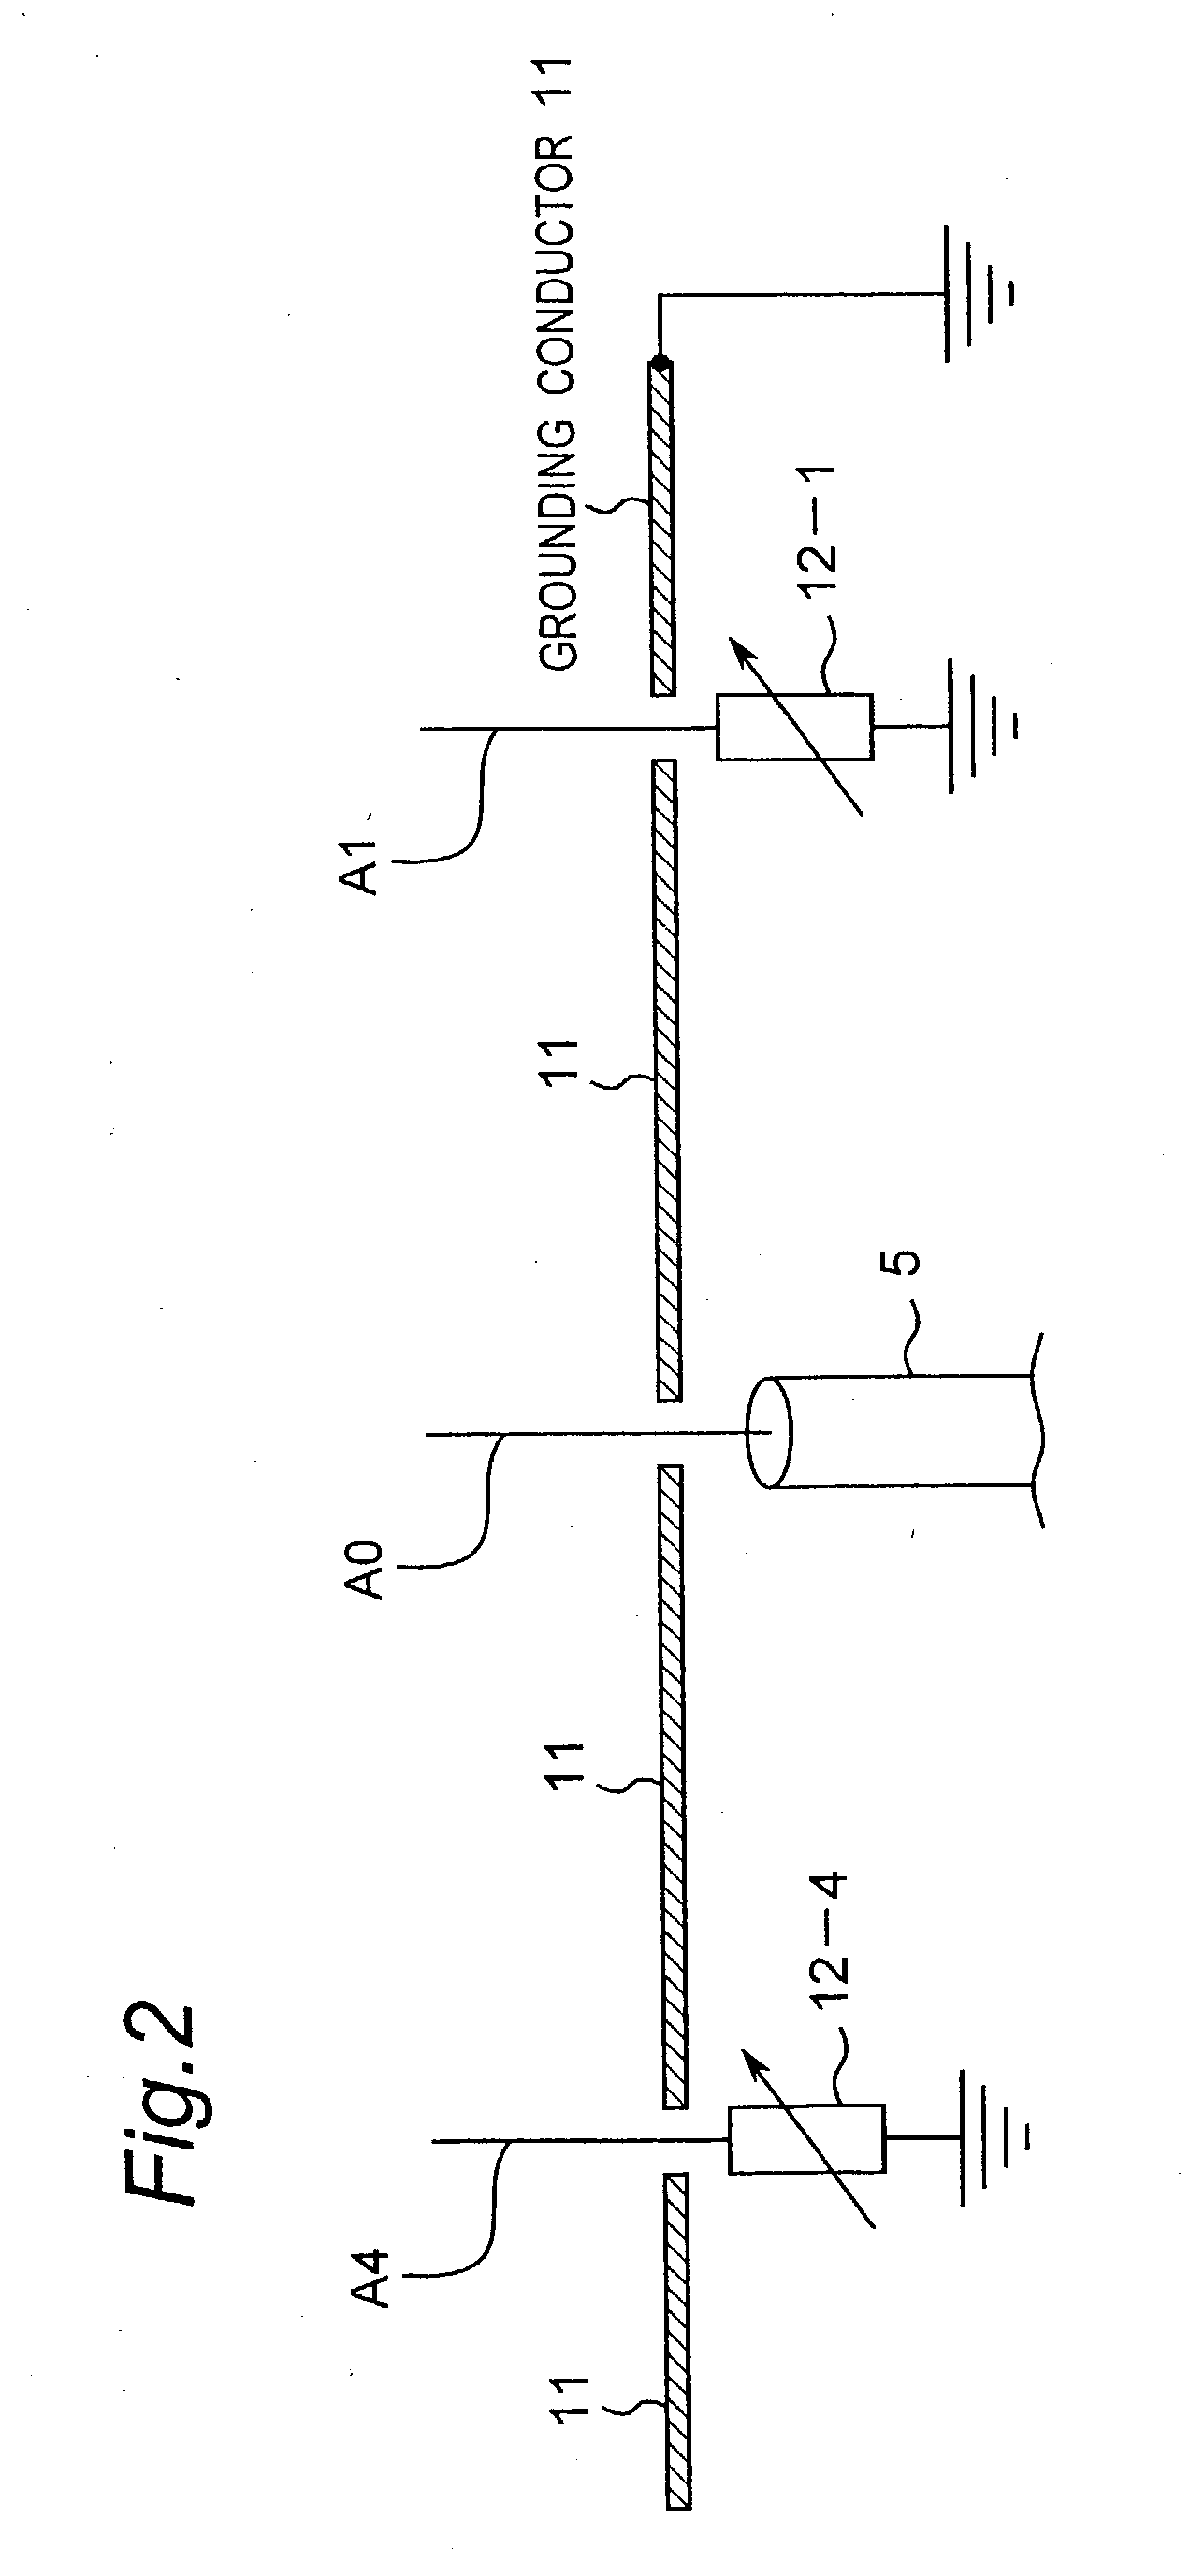 Method for controlling array antenna equipped with a plurality of antenna elements, method for calculating signal to noise ratio of received signal, and method for adaptively controlling radio receiver